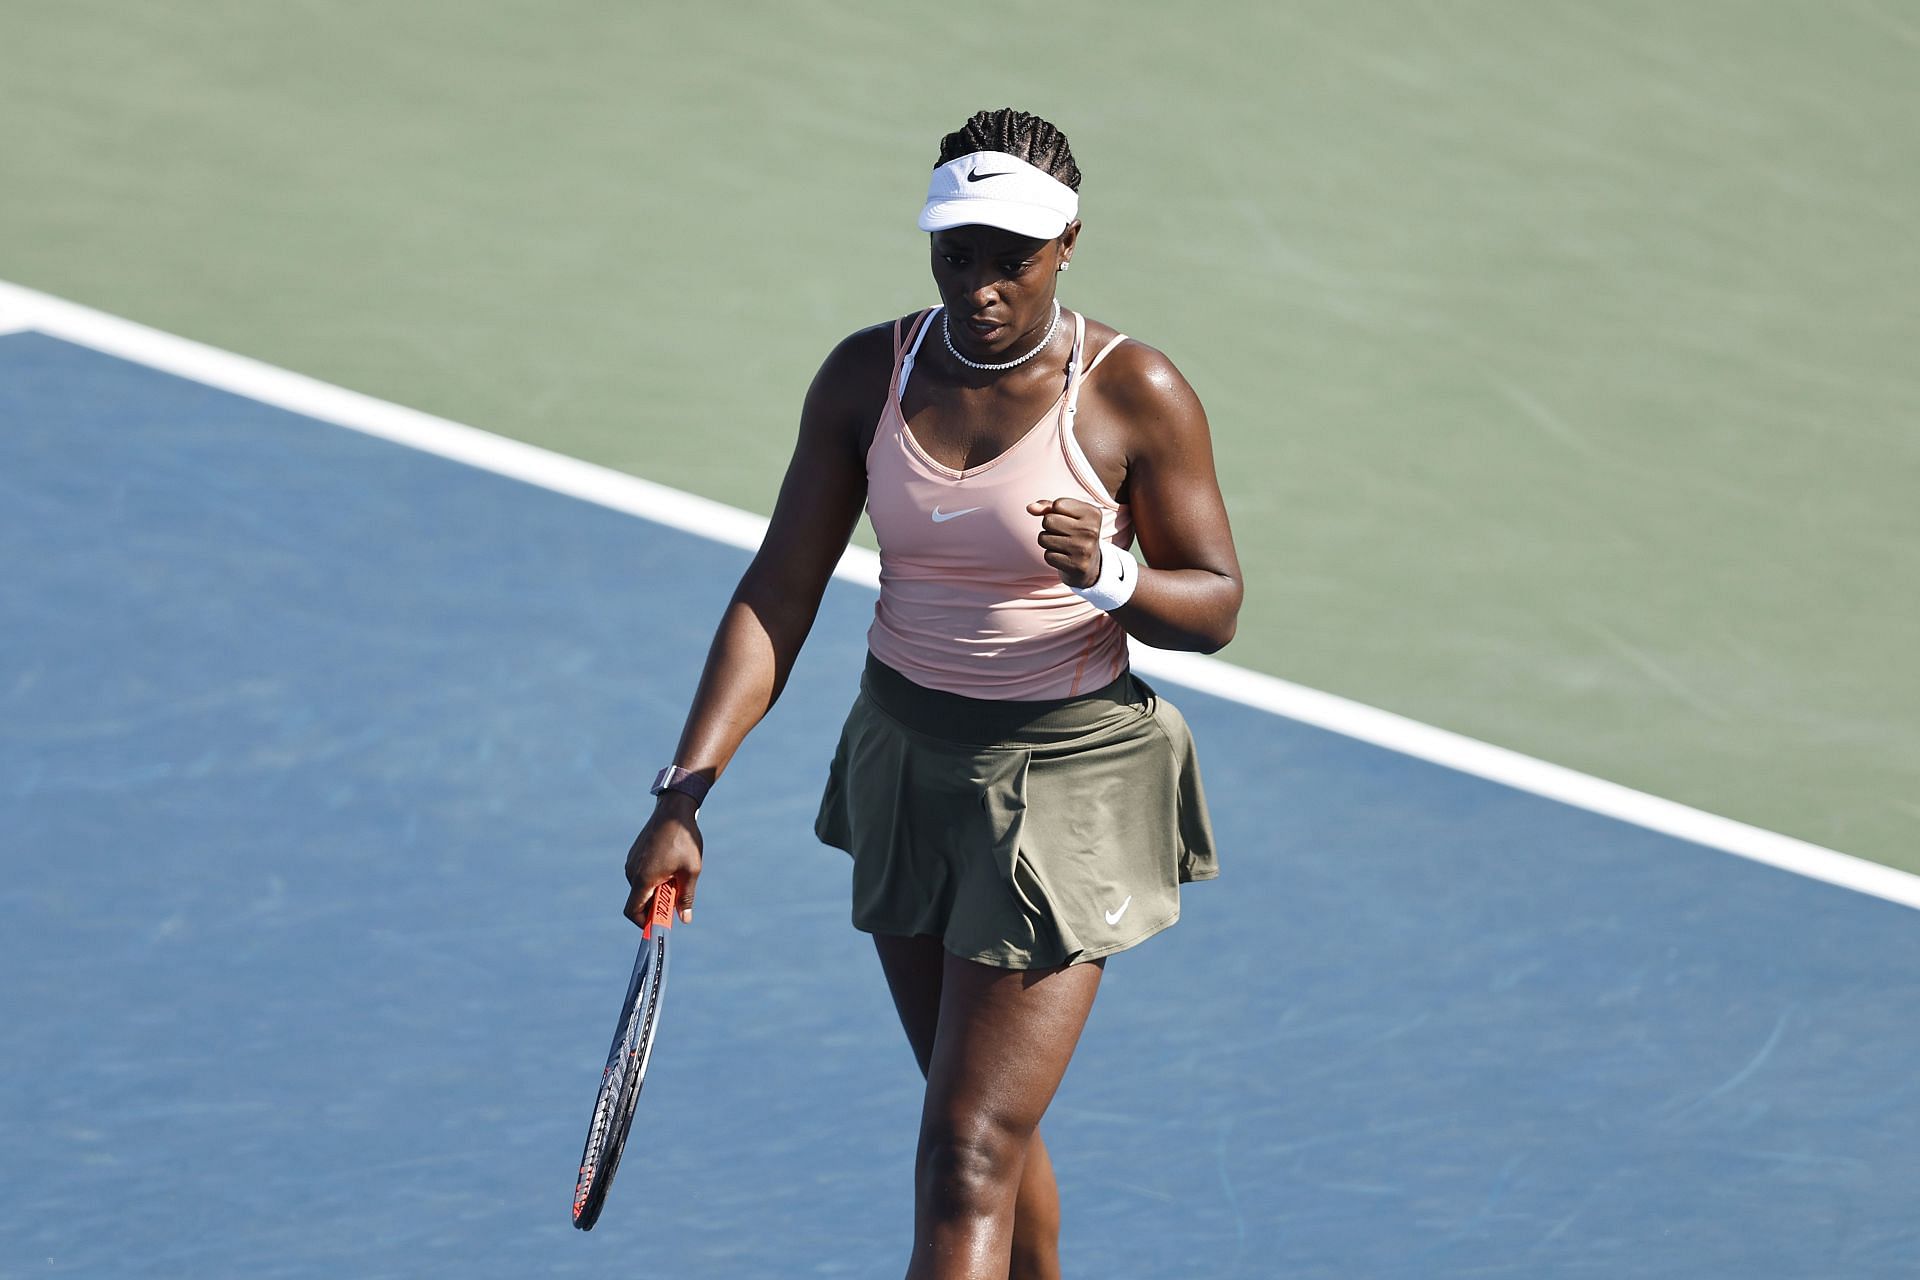 Sloane Stephens at the 2022 San Diego Open.